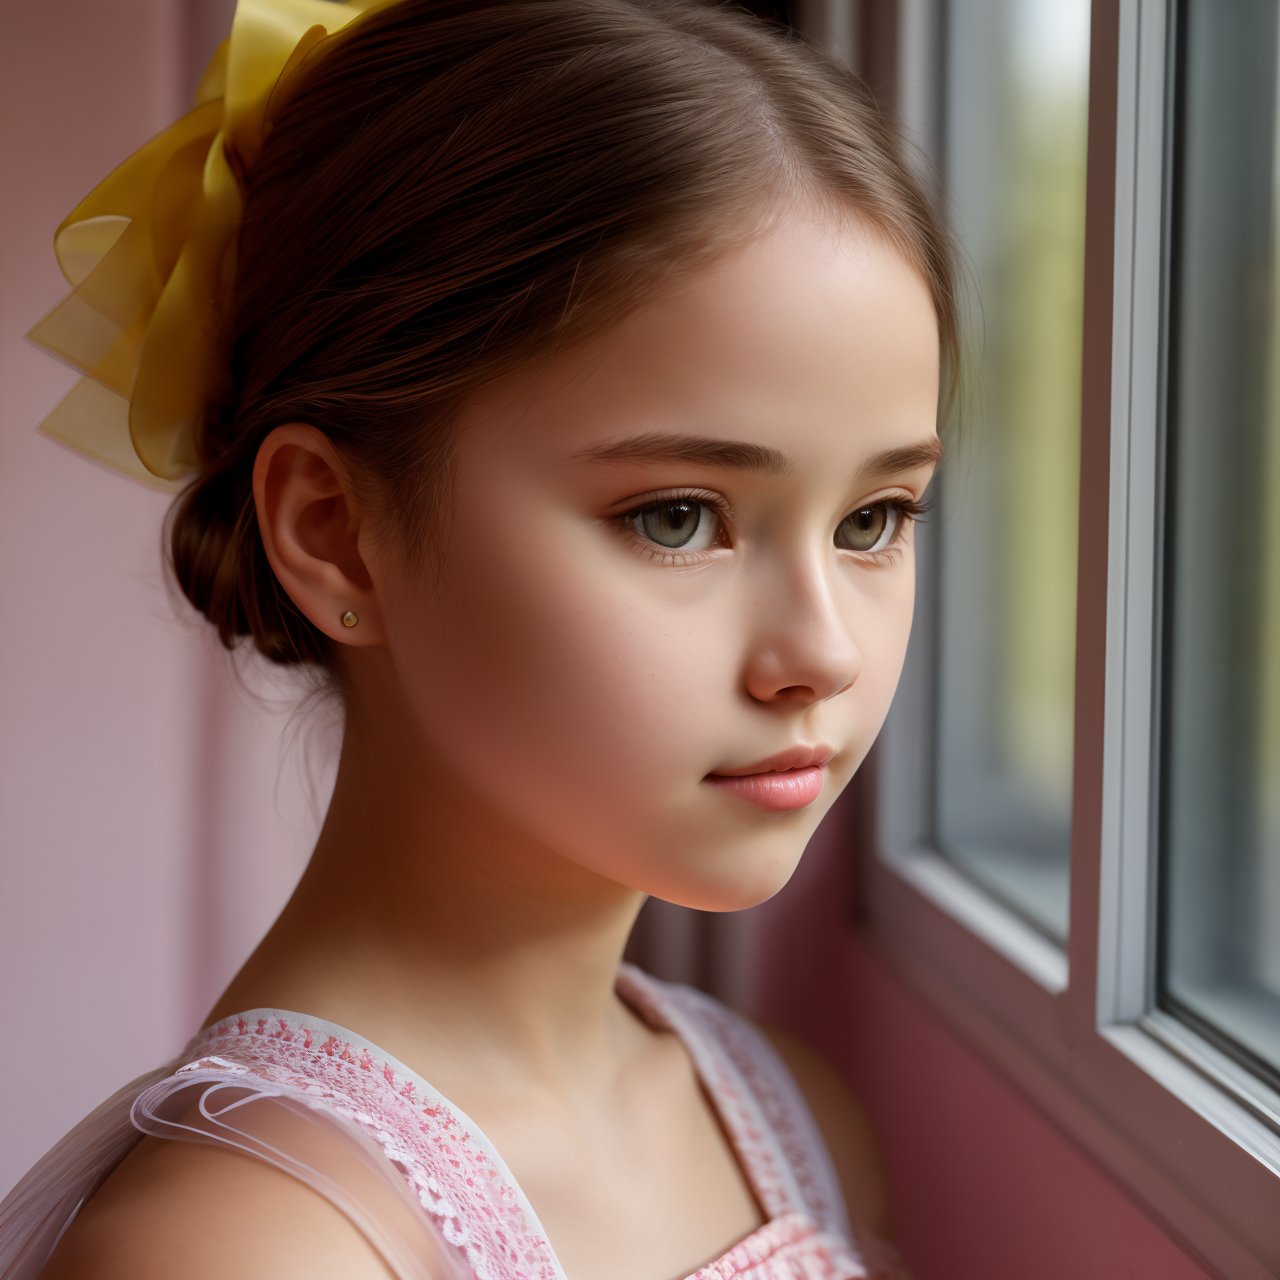 SFW, (masterpiece:1.3), extra resolution, looking back, close up of beautiful (AIDA_LoRA_HanF:1.06) <lora:AIDA_LoRA_HanF:0.78> standing next to the window, street beside the window, backlight, sunlight, pretty face, yellow dress, pink bow on her head, naughty, intricate pattern, studio photo, kkw-ph1, hdr, f1.6, getty images